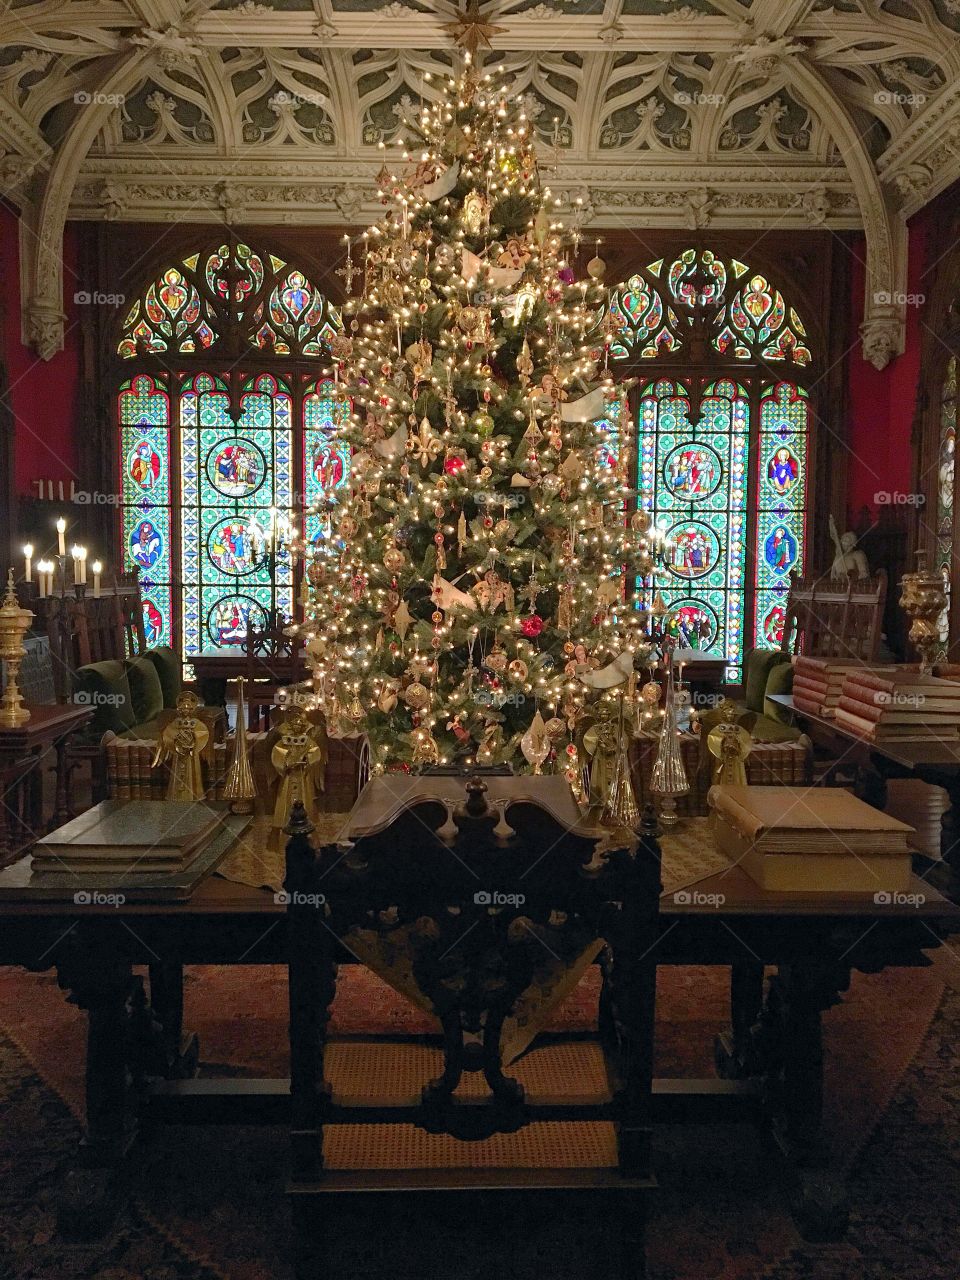 An elegantly decorated Christmas tree sits in front of an old writing desk and is illuminated by stained glass windows